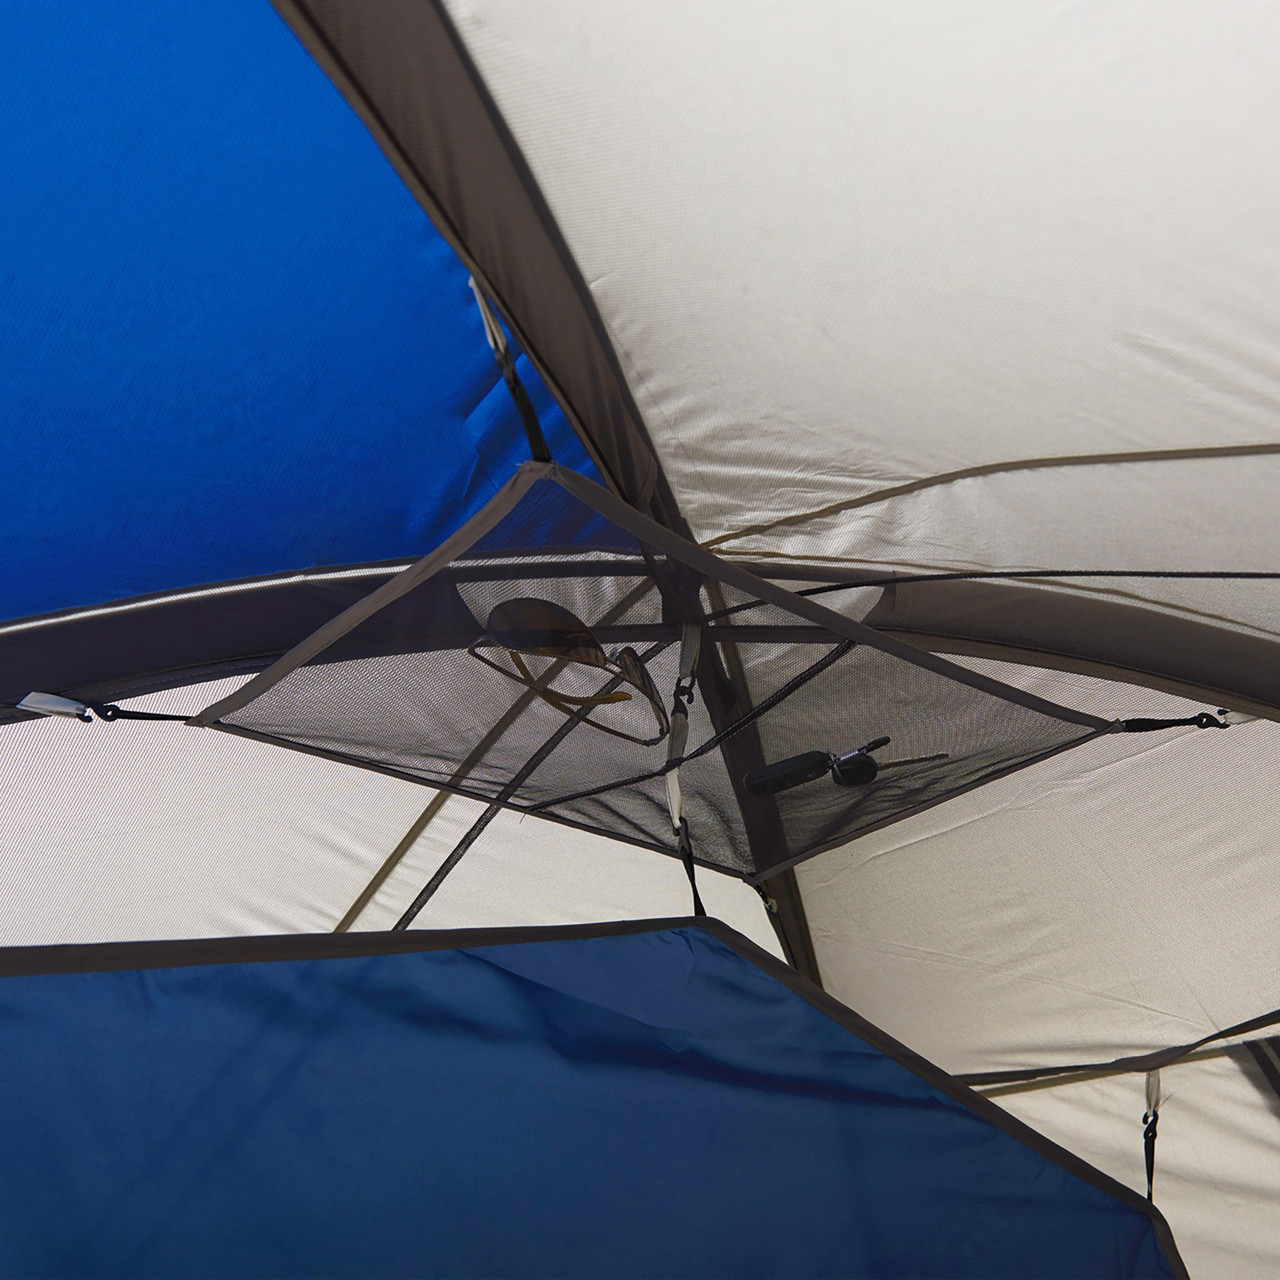 Interior of Wenzel Pinyon 10 Person Dome Tent, blue/white, showing gear loft